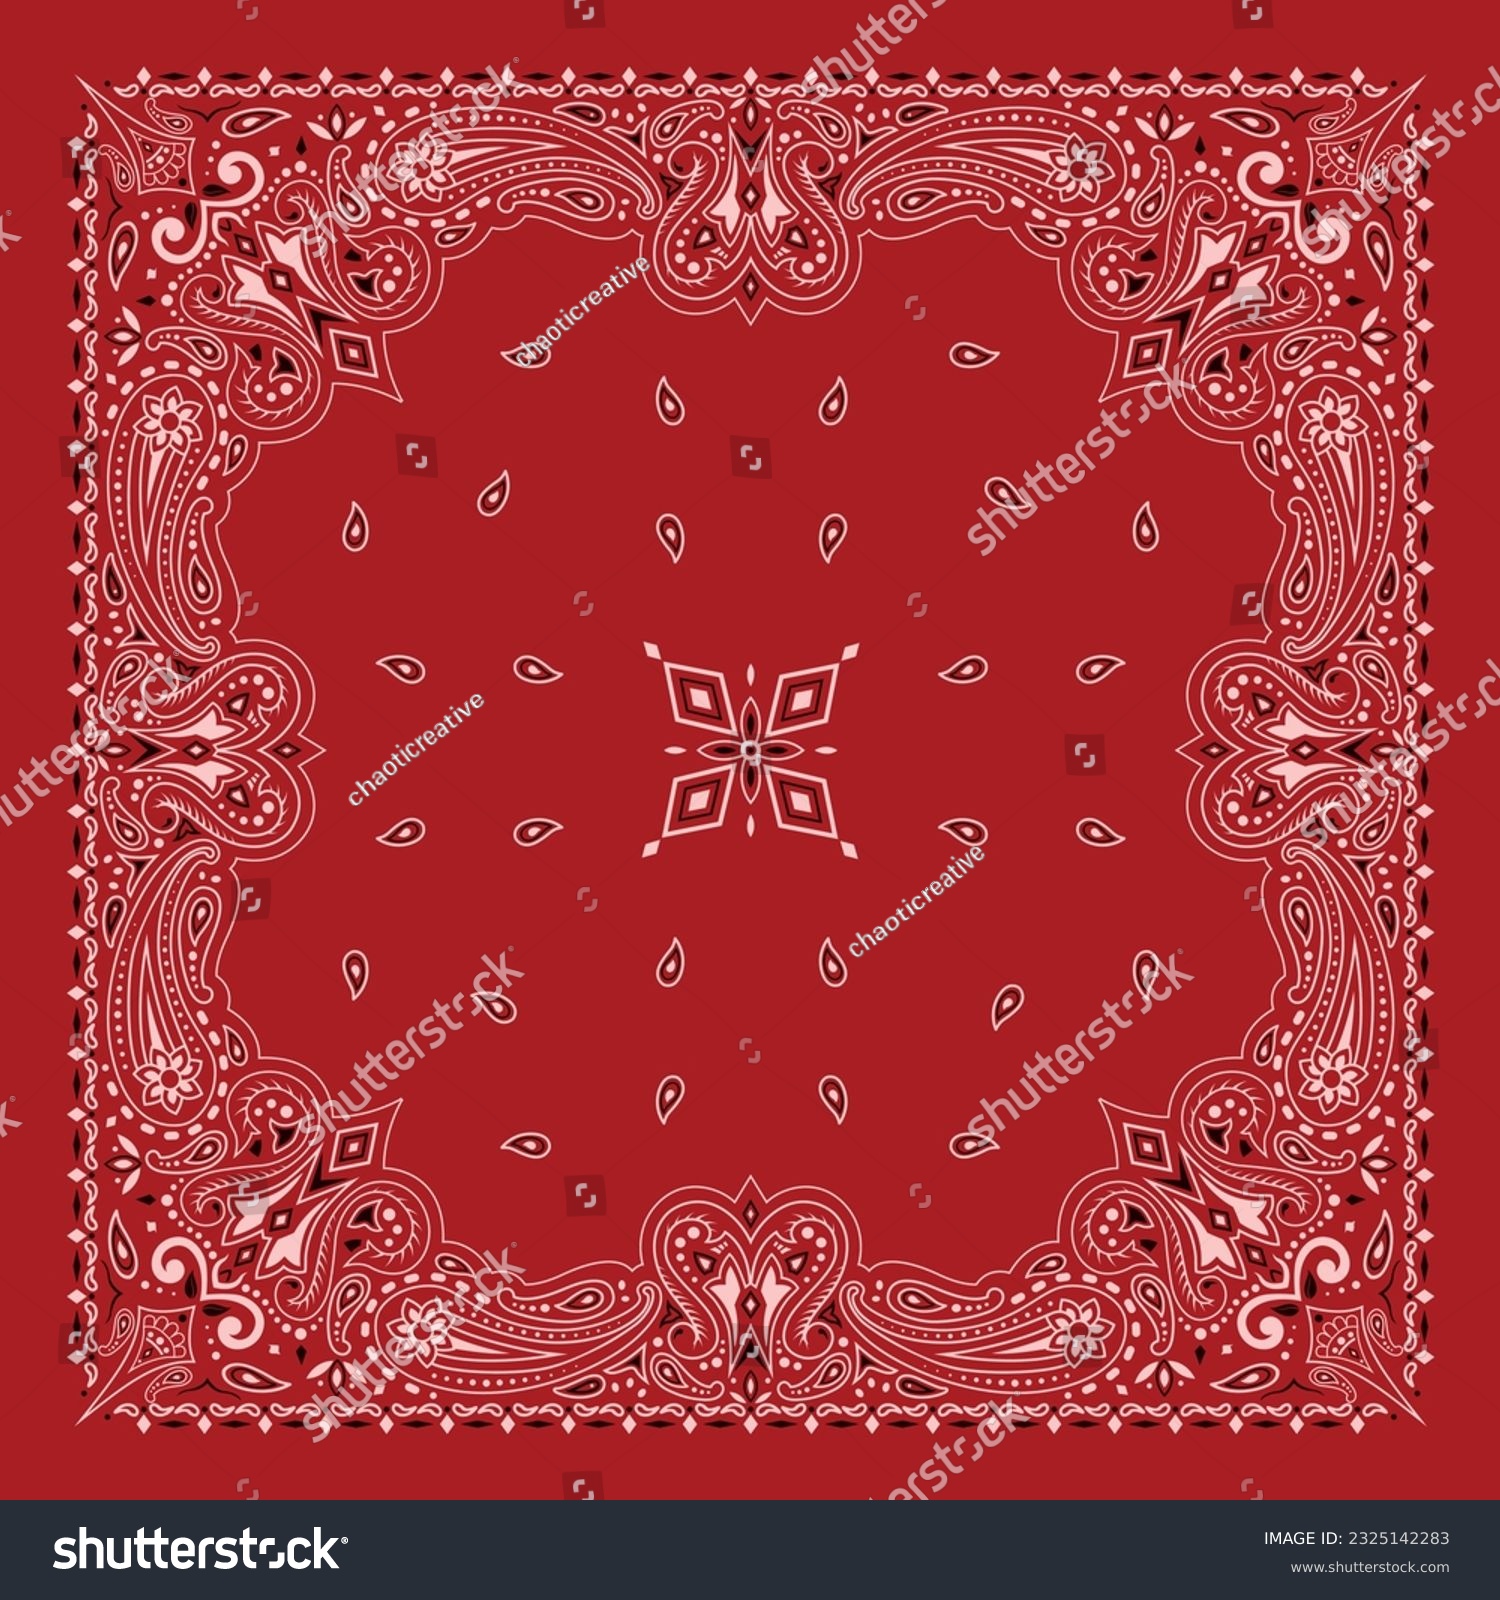 SVG of Simply Bandana decorated with white black geometric ornament lines that can be applied to fabrics of various colors
 svg